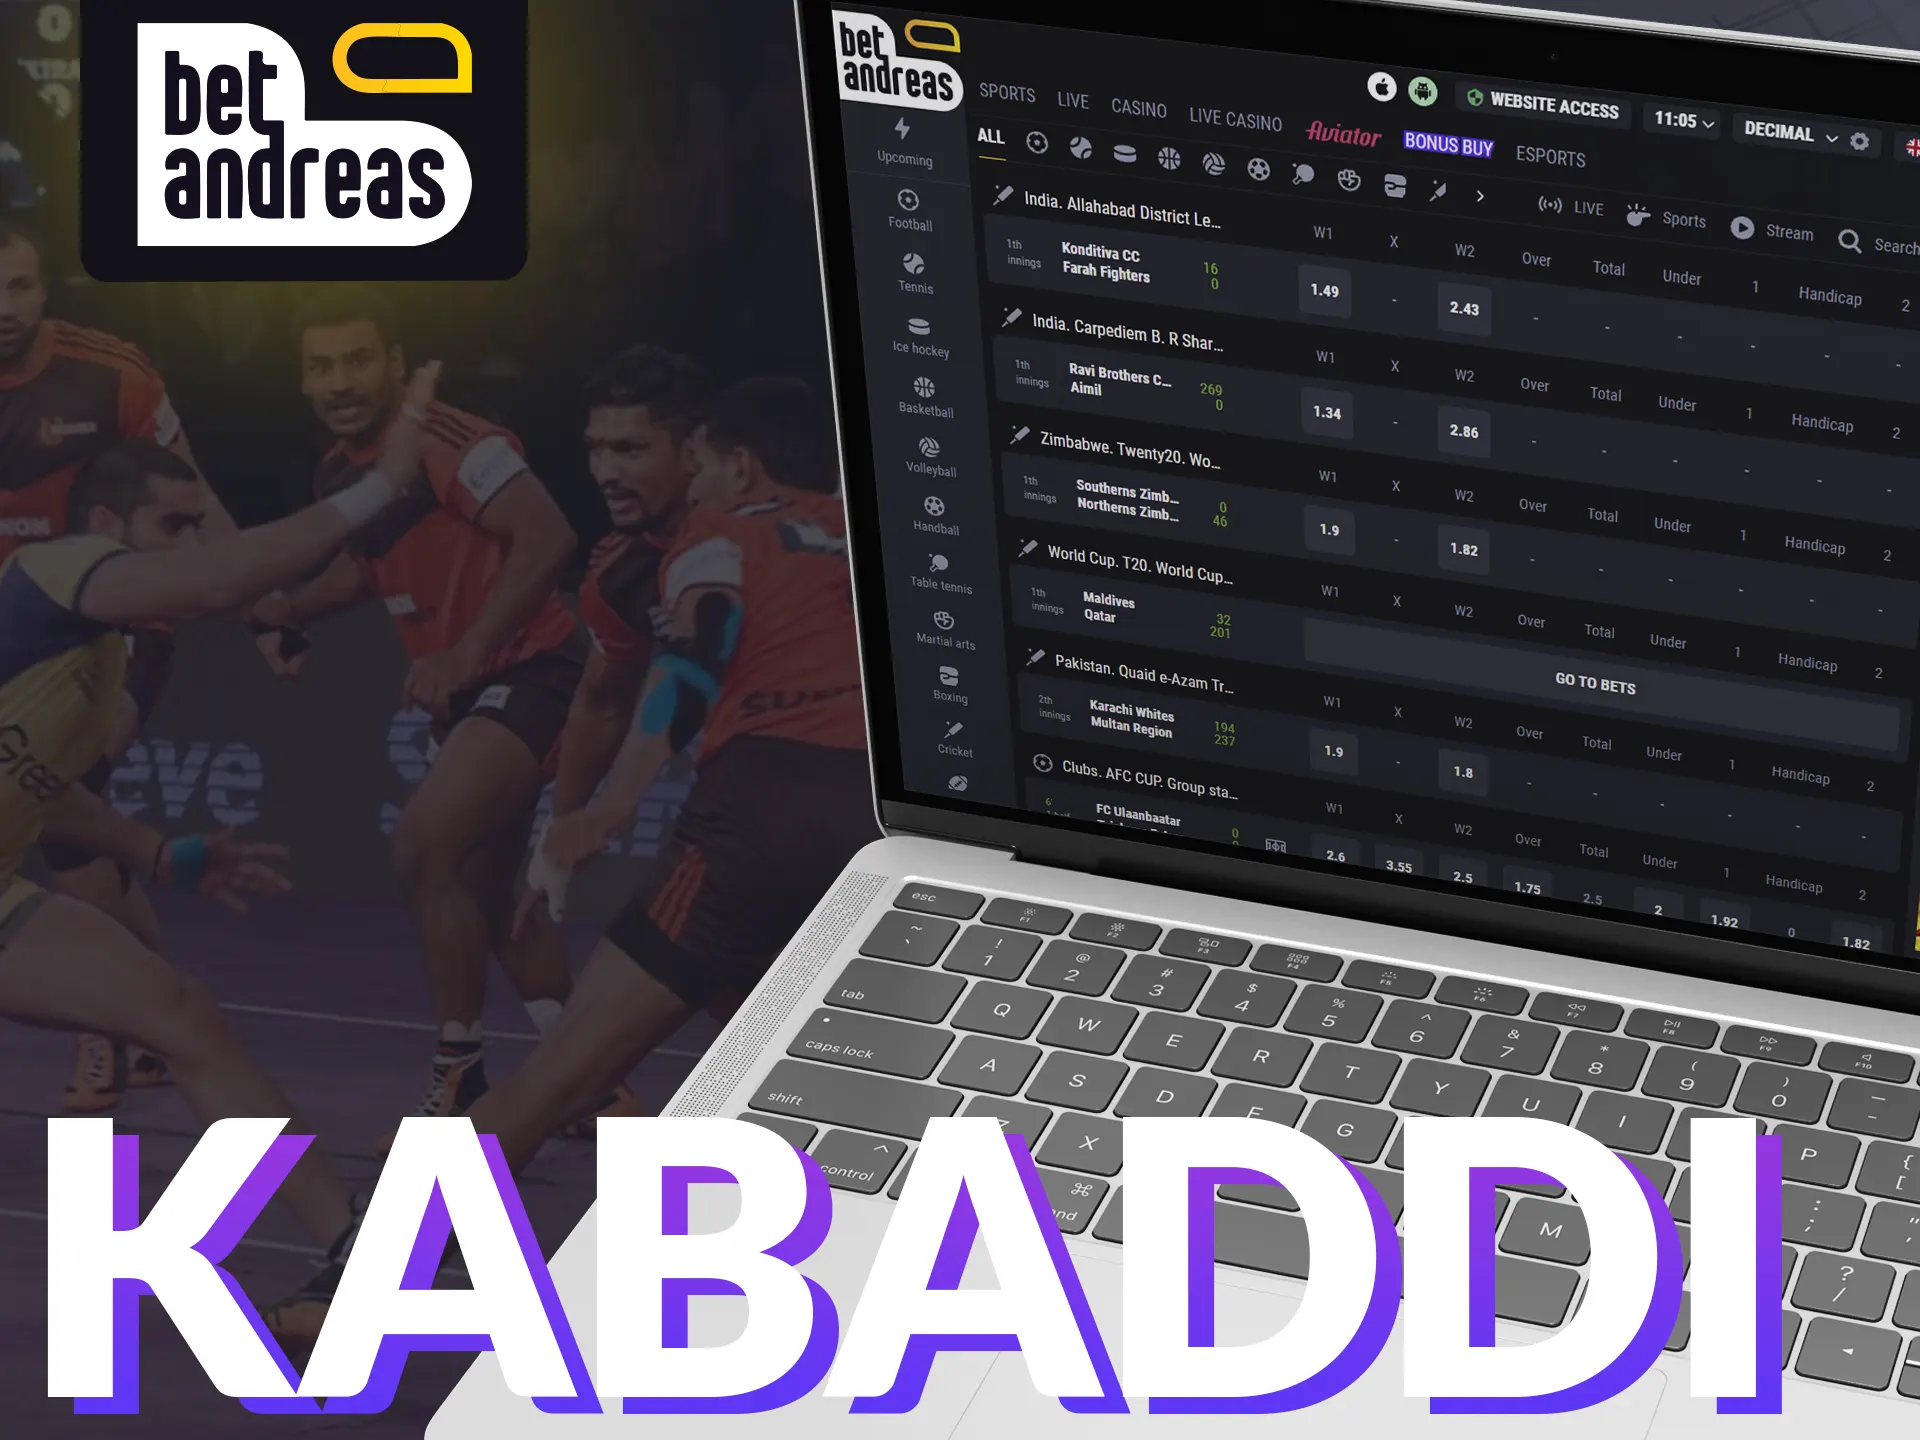 Place your kabaddi bets with BetAndreas.